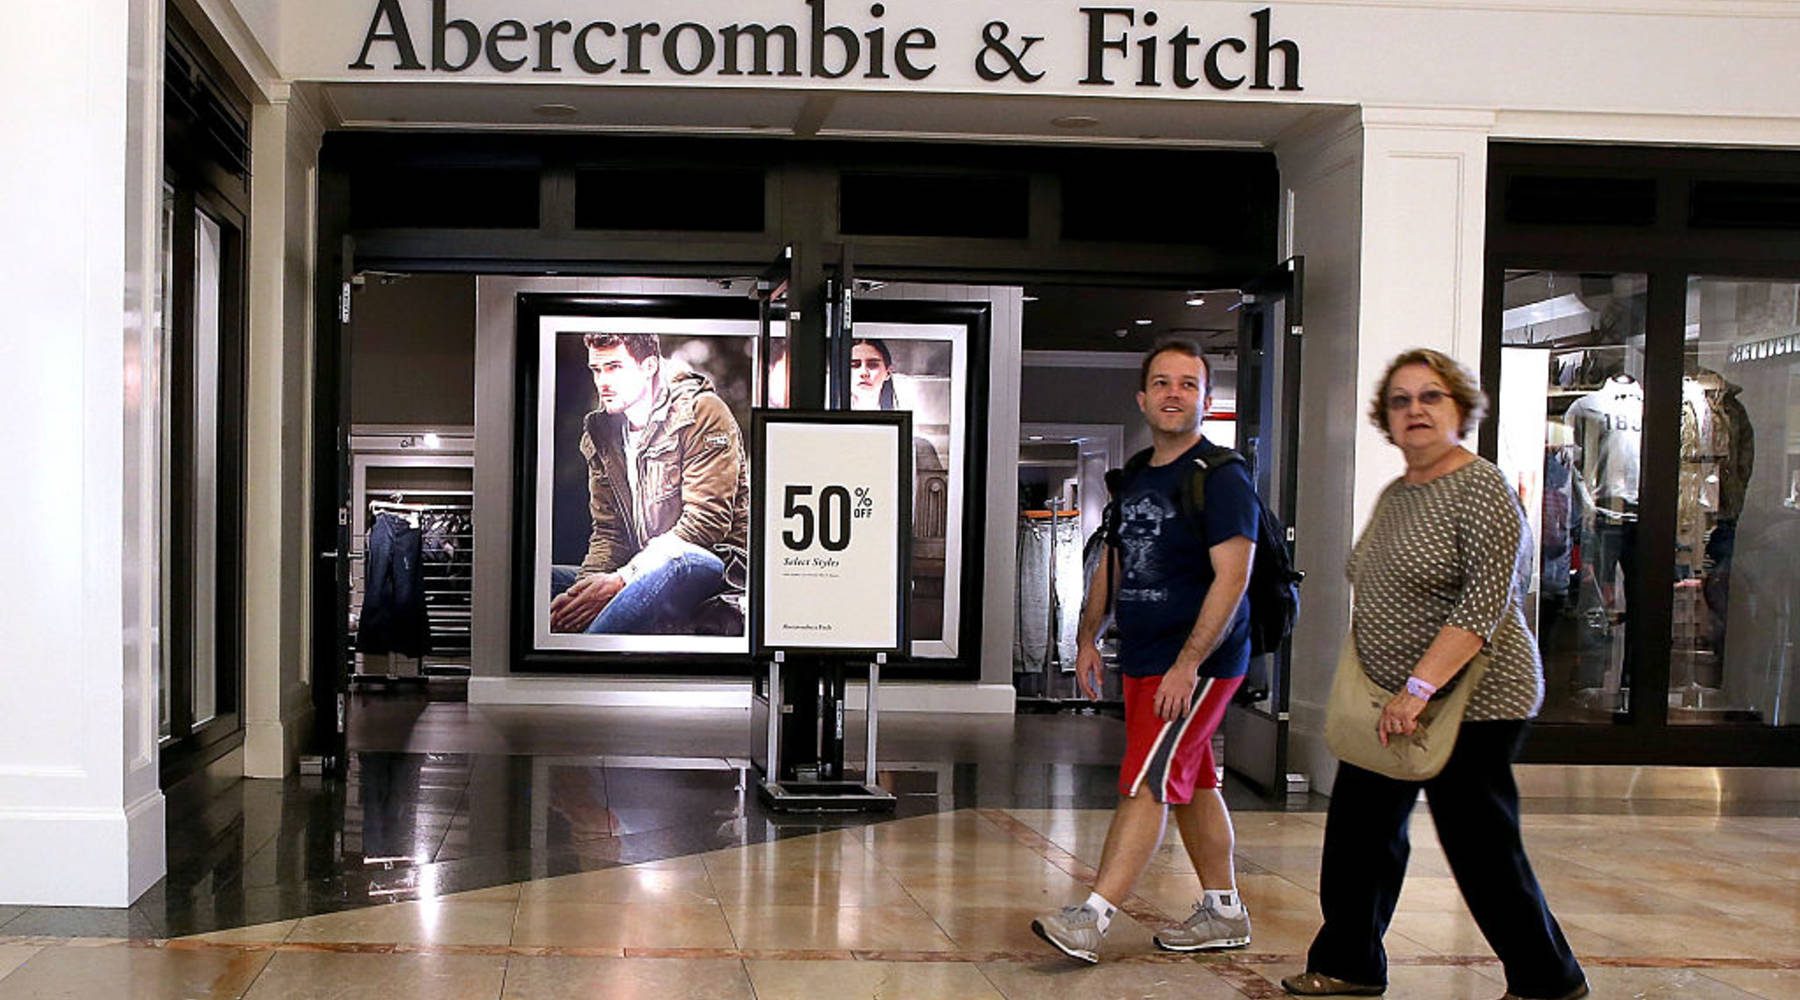 abercrombie and fitch reputation